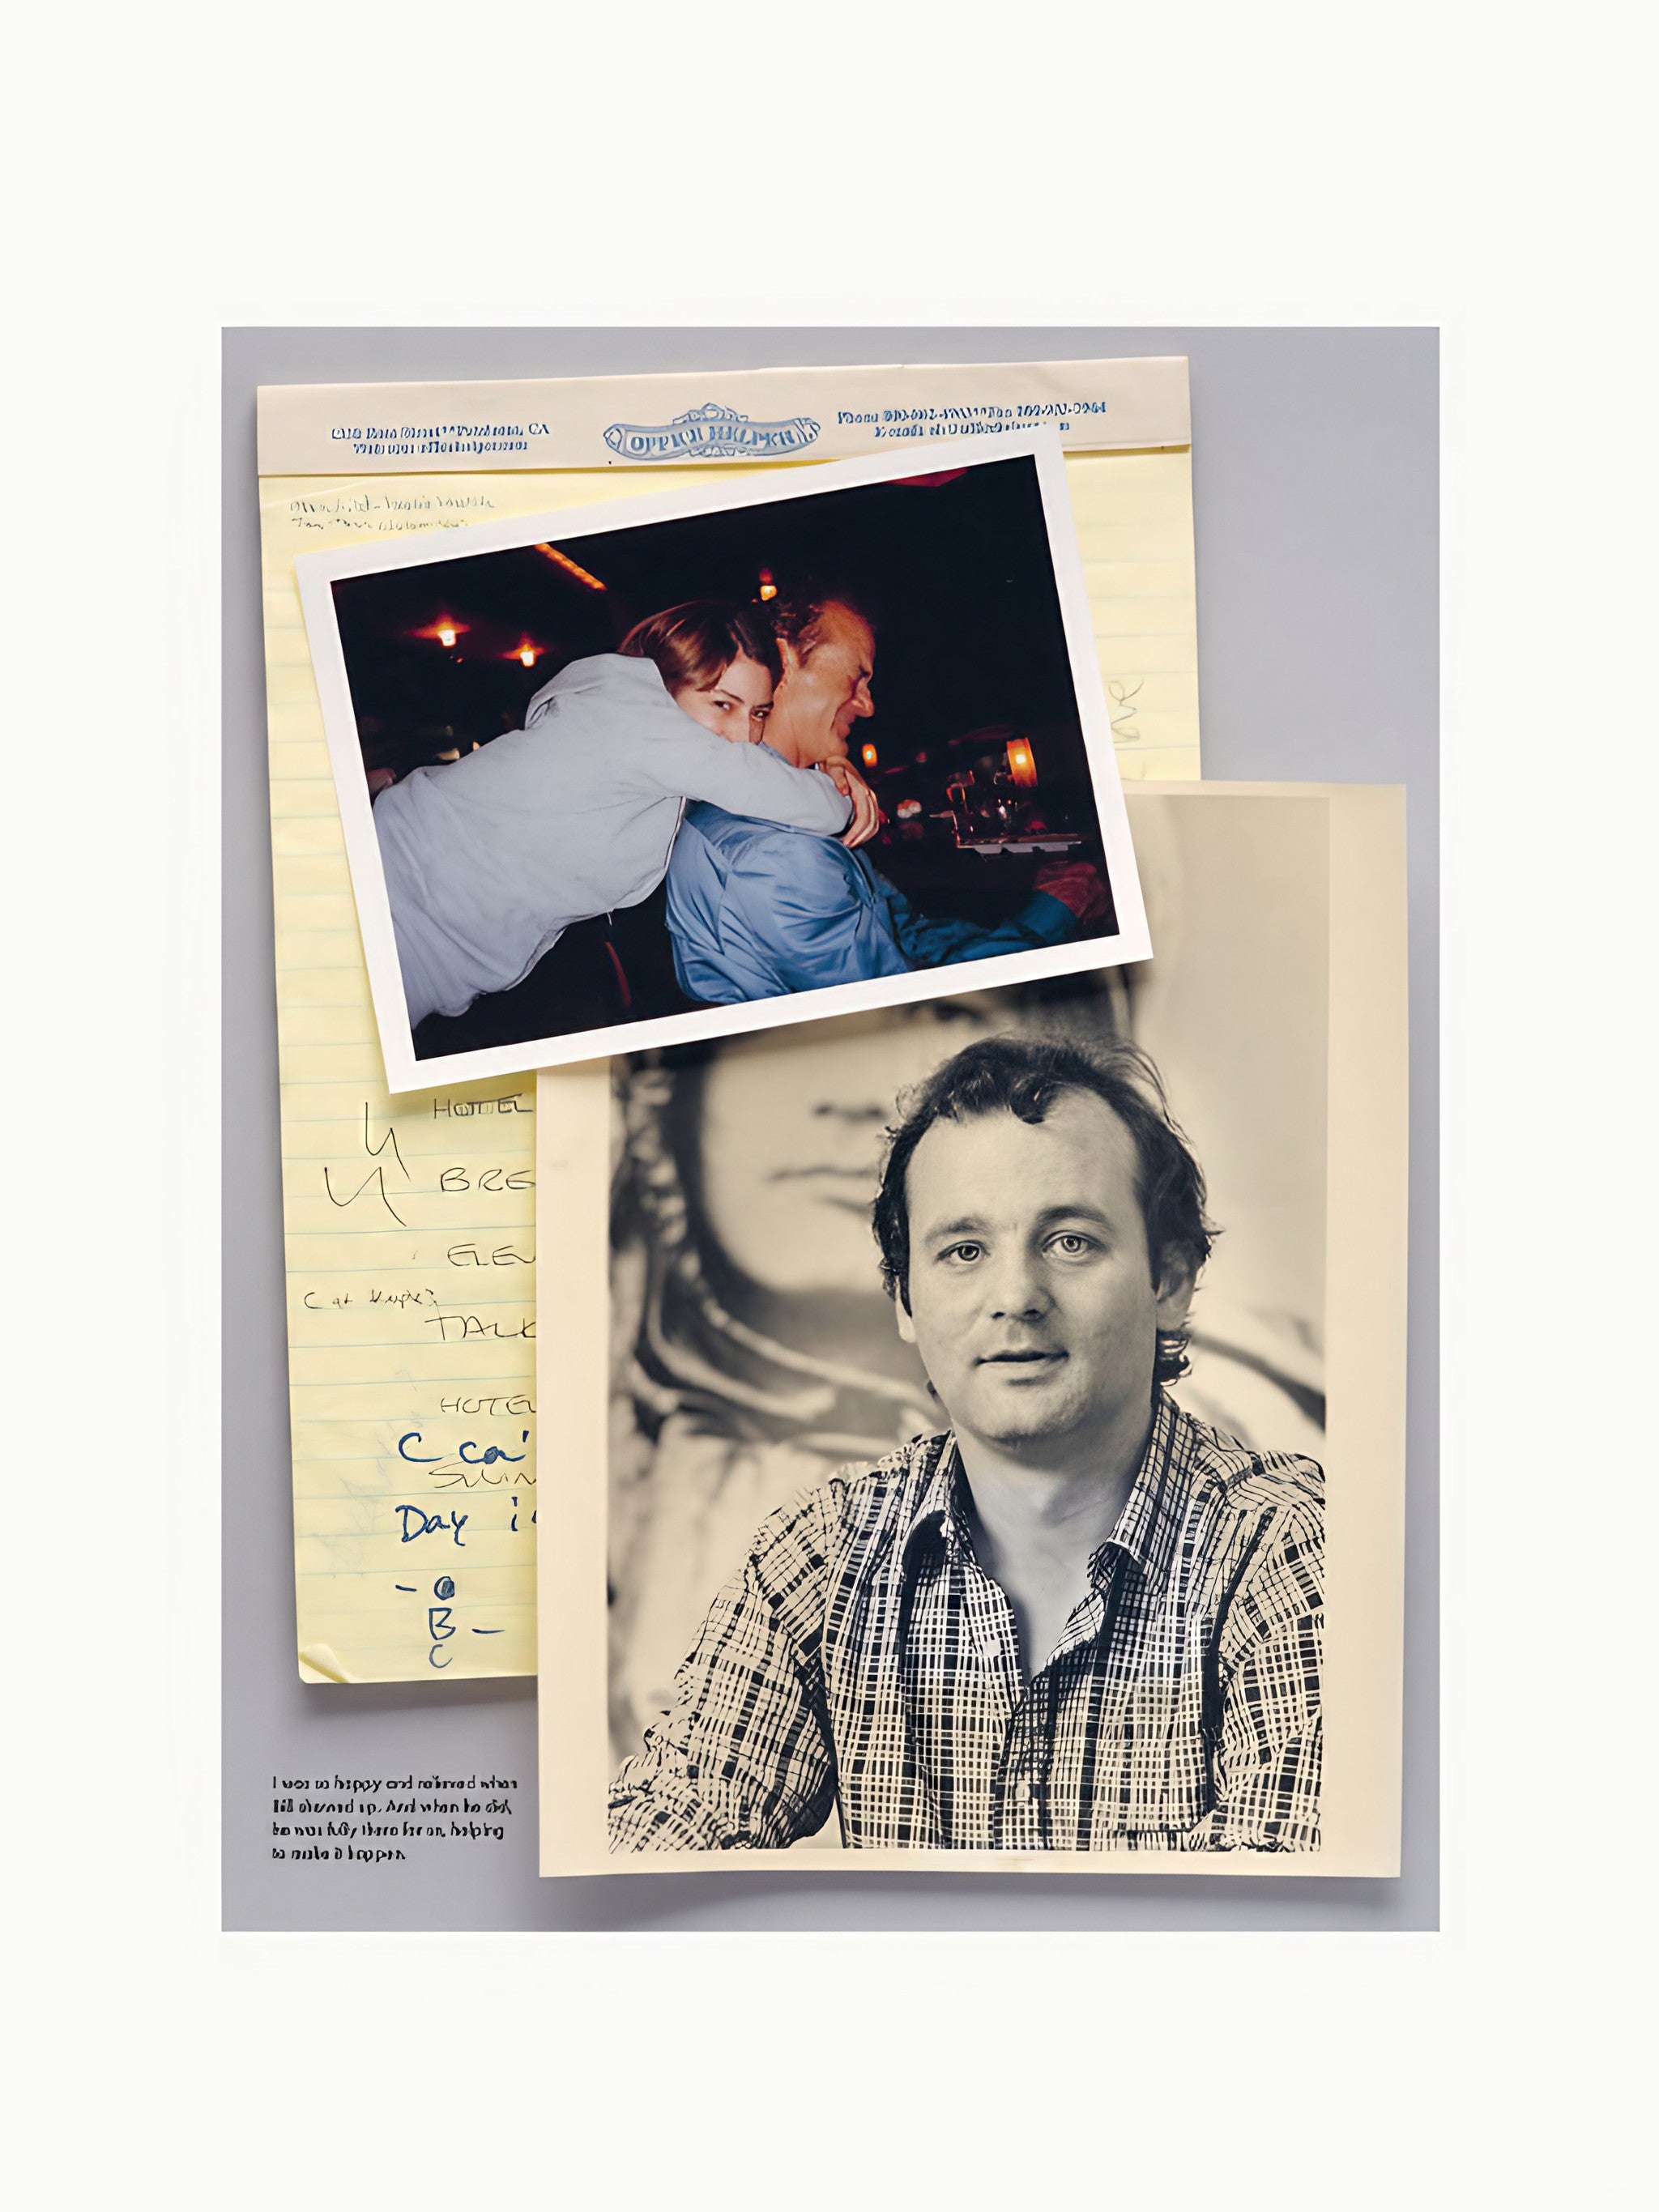 A collage of photographs and notes on a beige background. The top photo shows a couple kissing, the middle photo is a close-up of a smiling man in a plaid shirt reminiscent of scenes from Maison Plage's Archive Sofia Coppola.